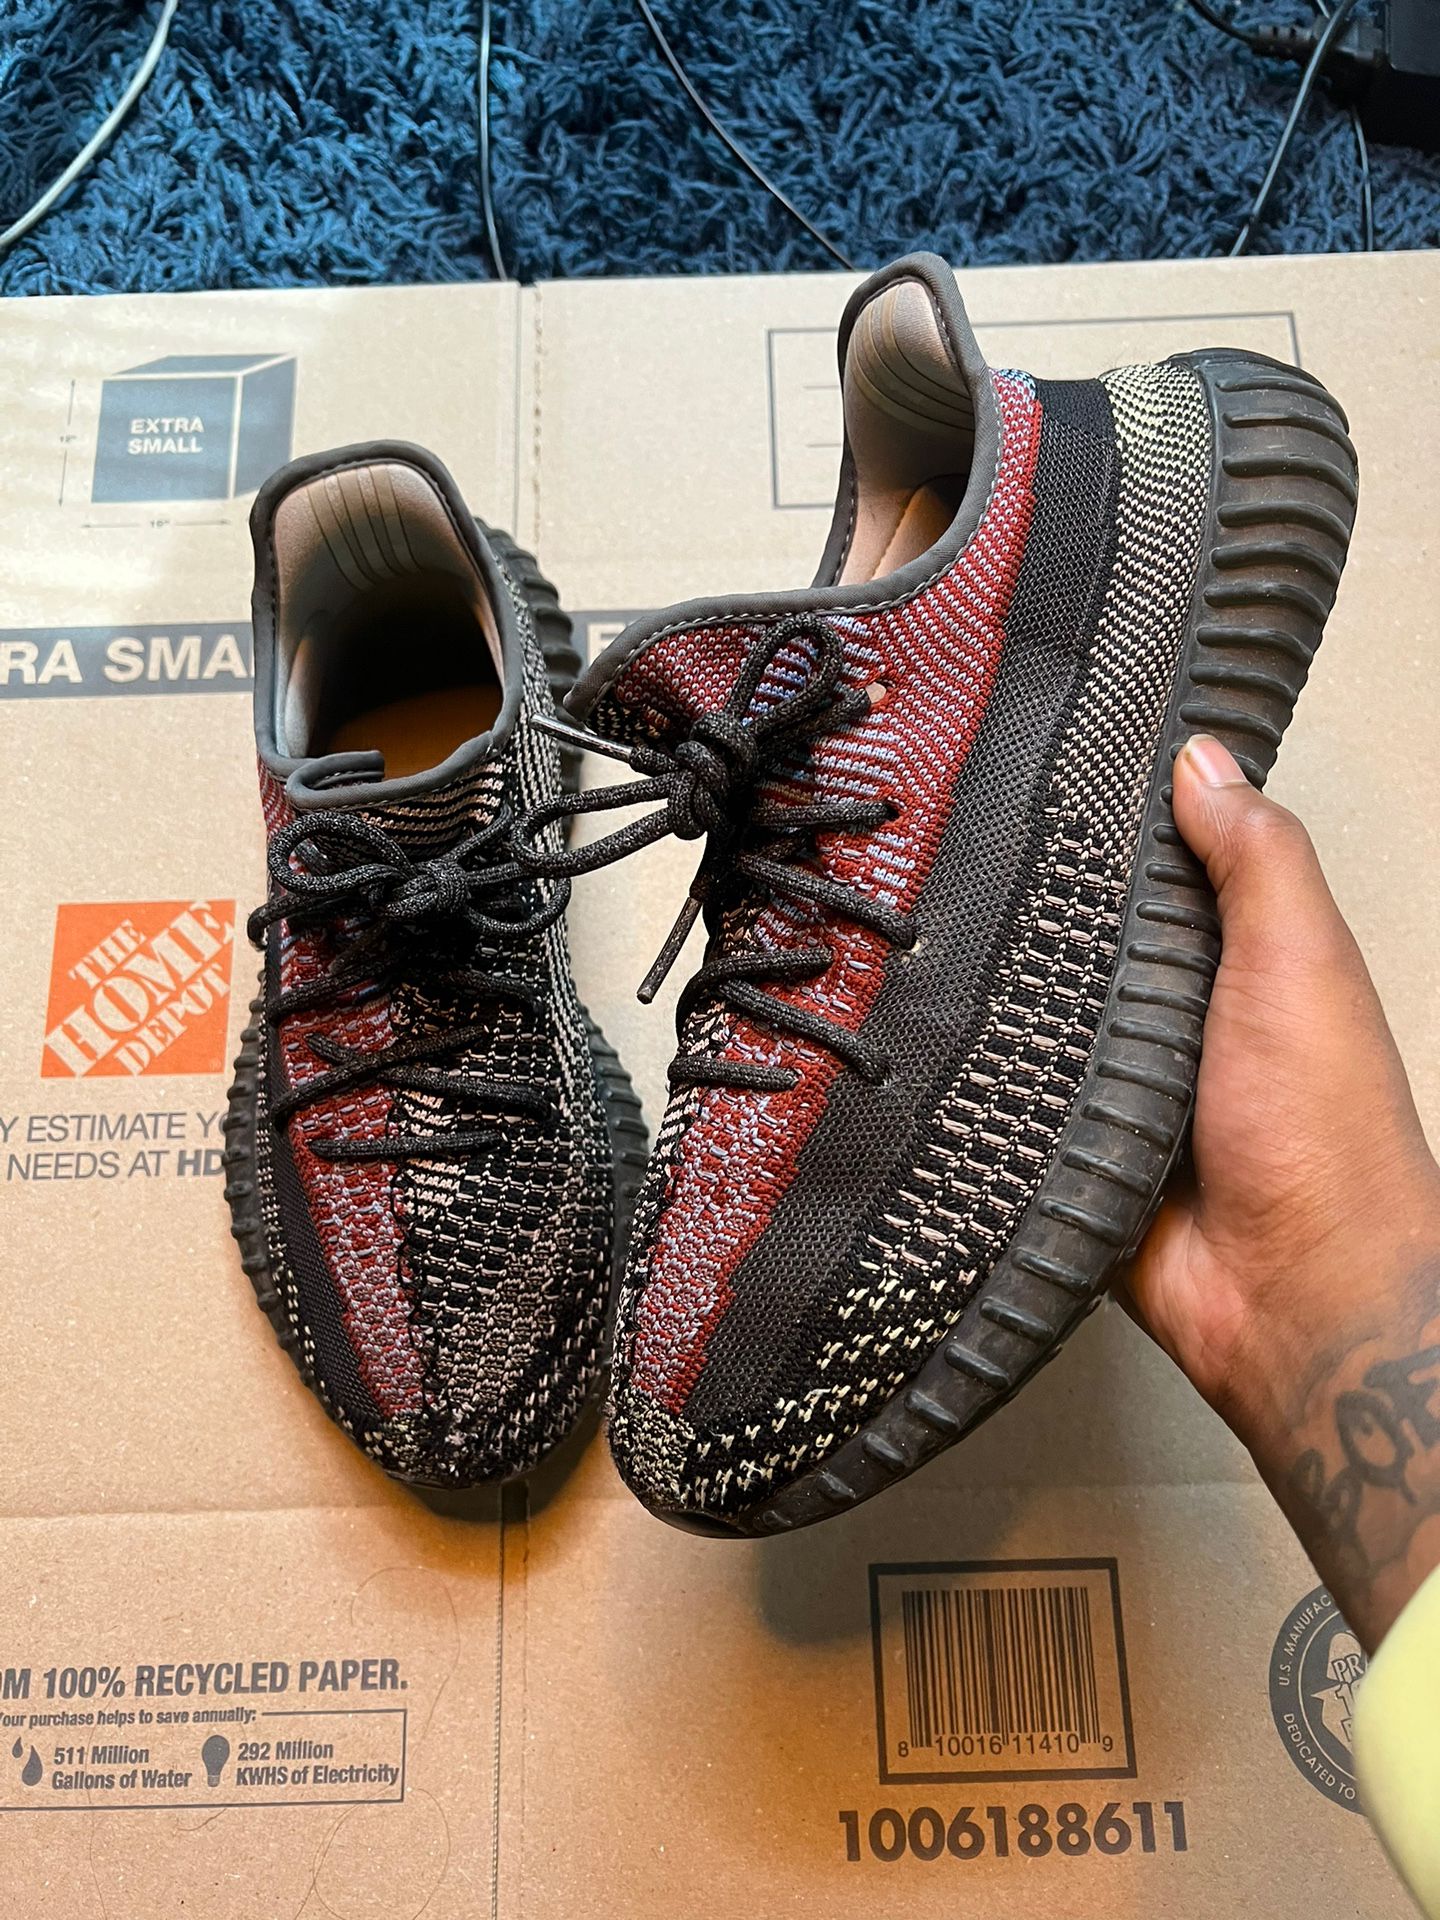 Adidas Yeezy Boots 350 V2 Yecheil (Non-Reflective)